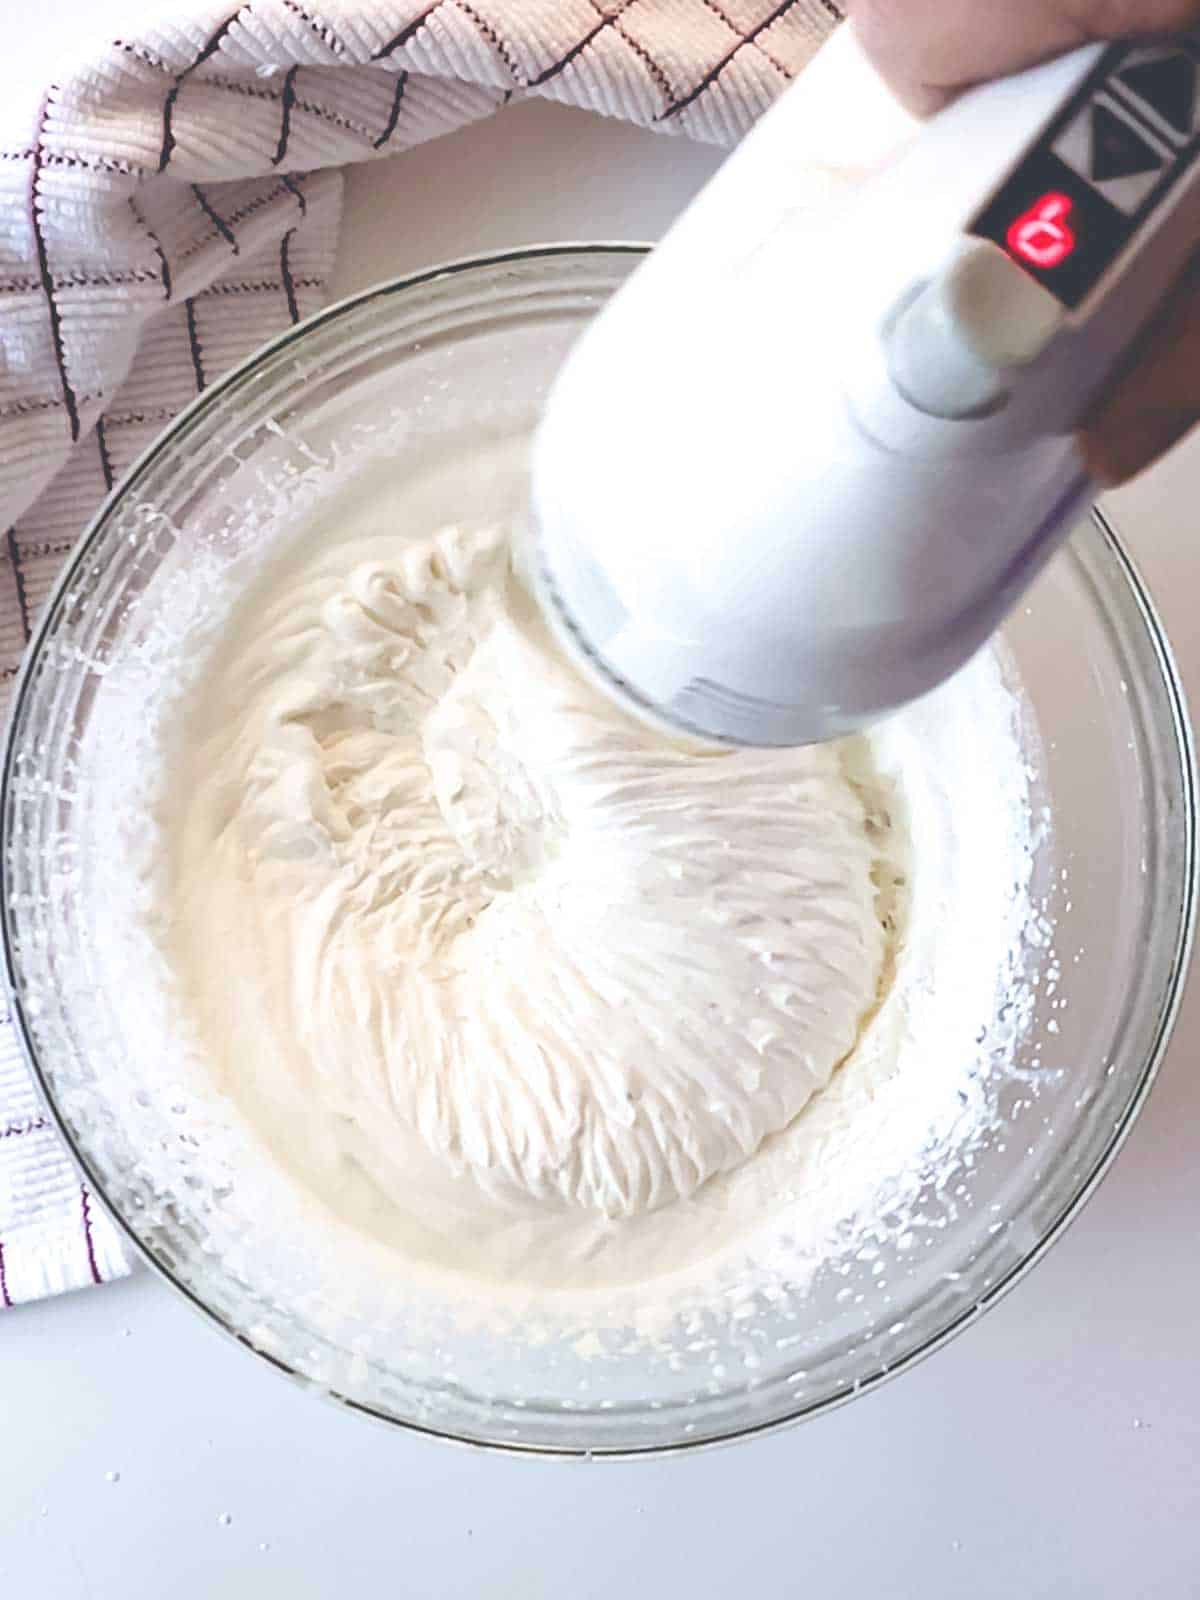 Beating heavy cream with electric mixer.